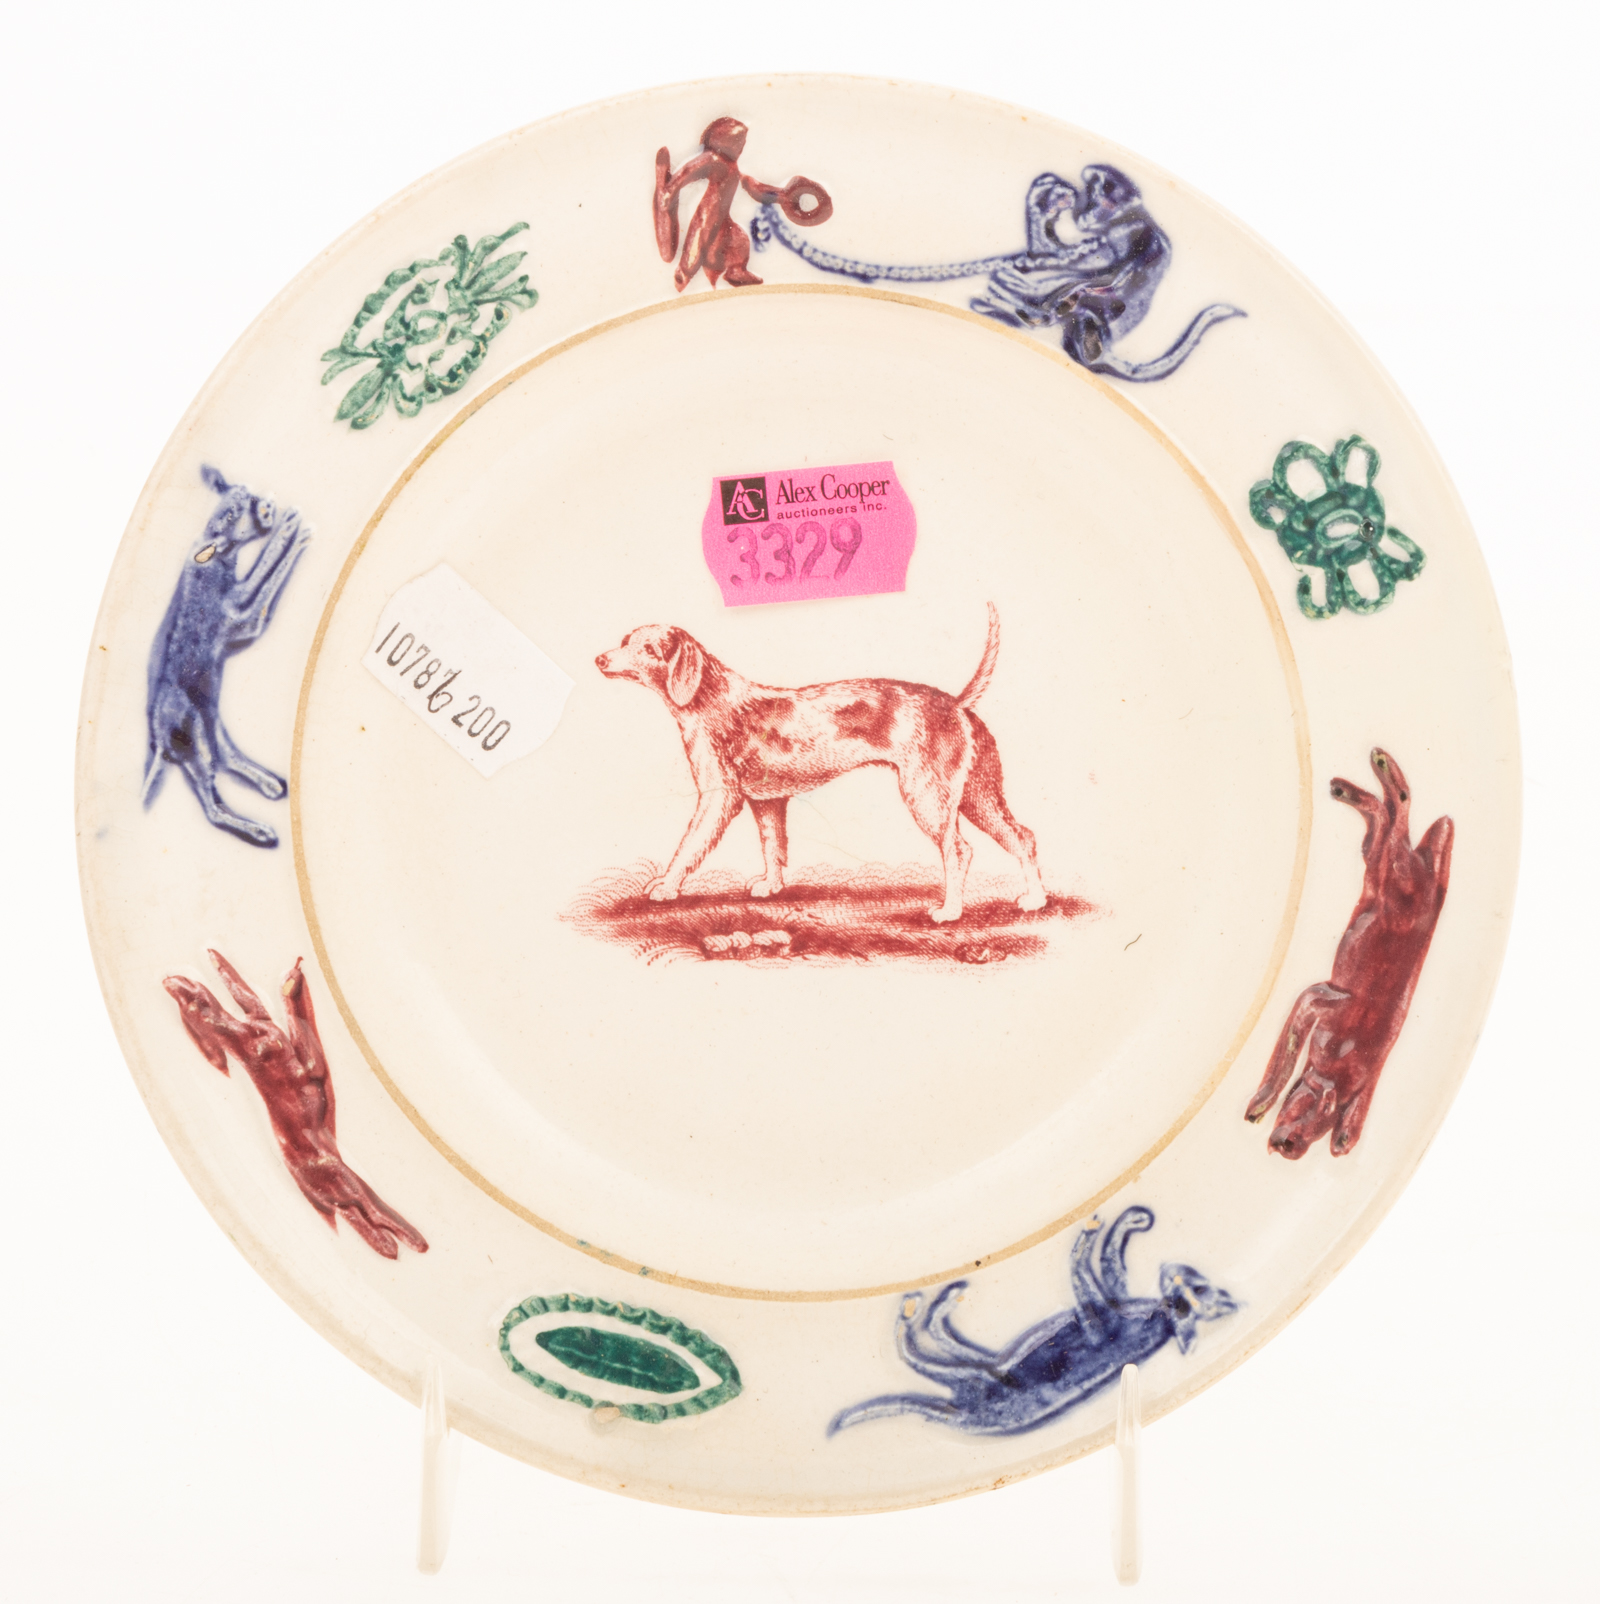 STAFFORDSHIRE CHILD'S PLATE Mid-19th